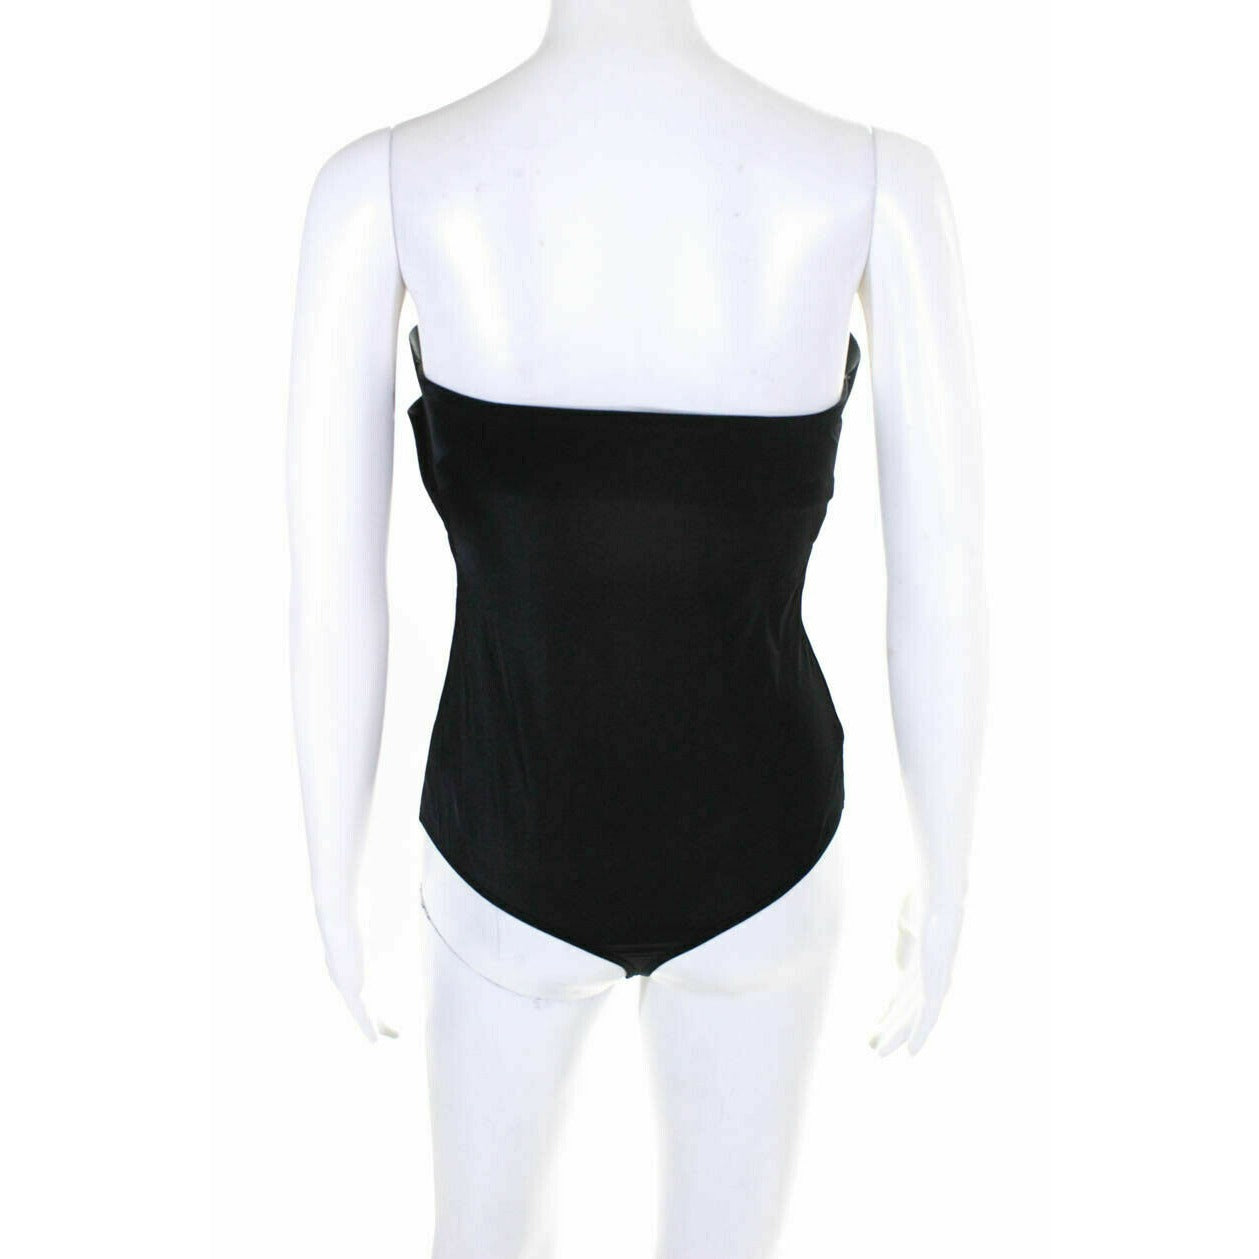 Wolford Giorgio Armani Strapless Body Suit Black Size Medium B Cup 718 –  Luxury Priced Right